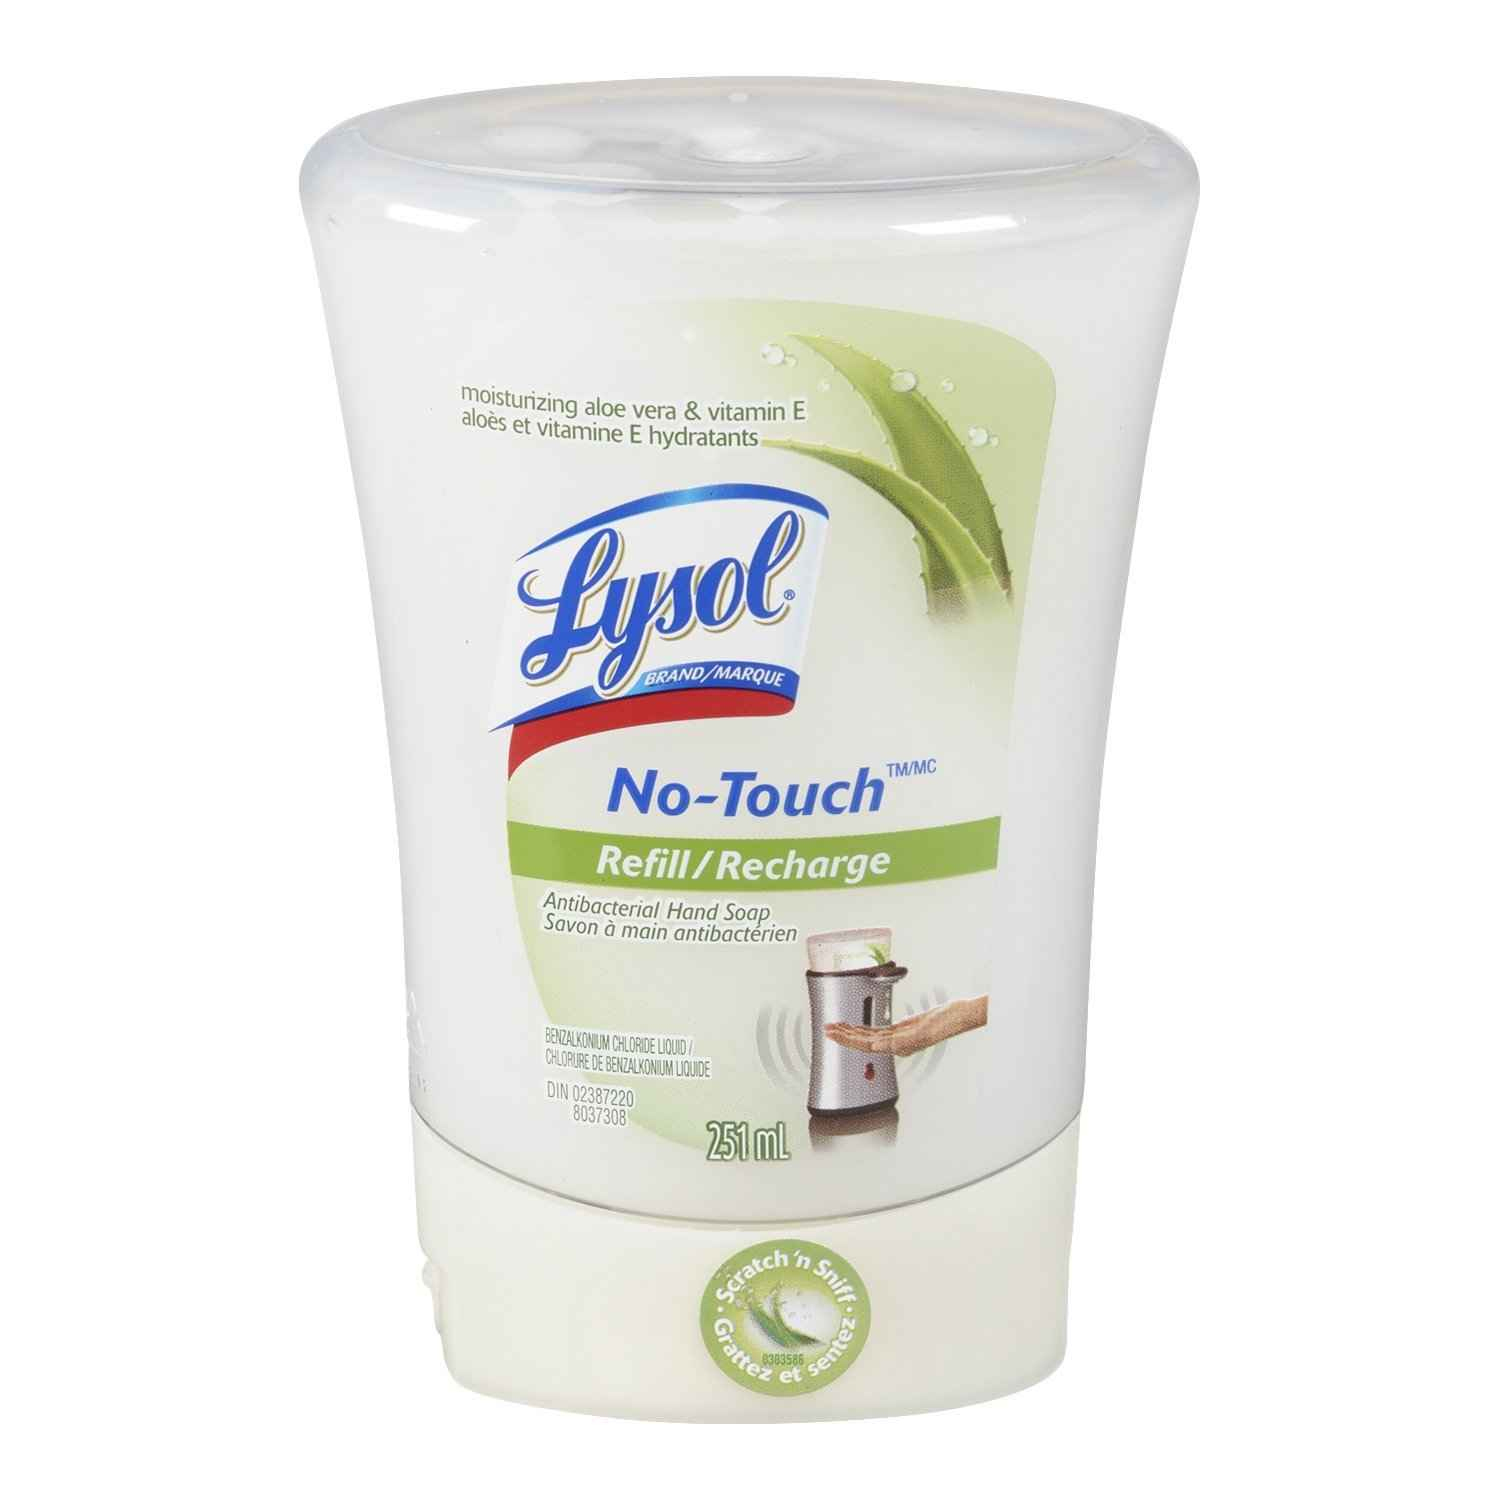 Lysol No Touch Coupon 2018 - Coupon Bond Wikipedia - Lysol Hands Free Soap Dispenser Printable Coupon